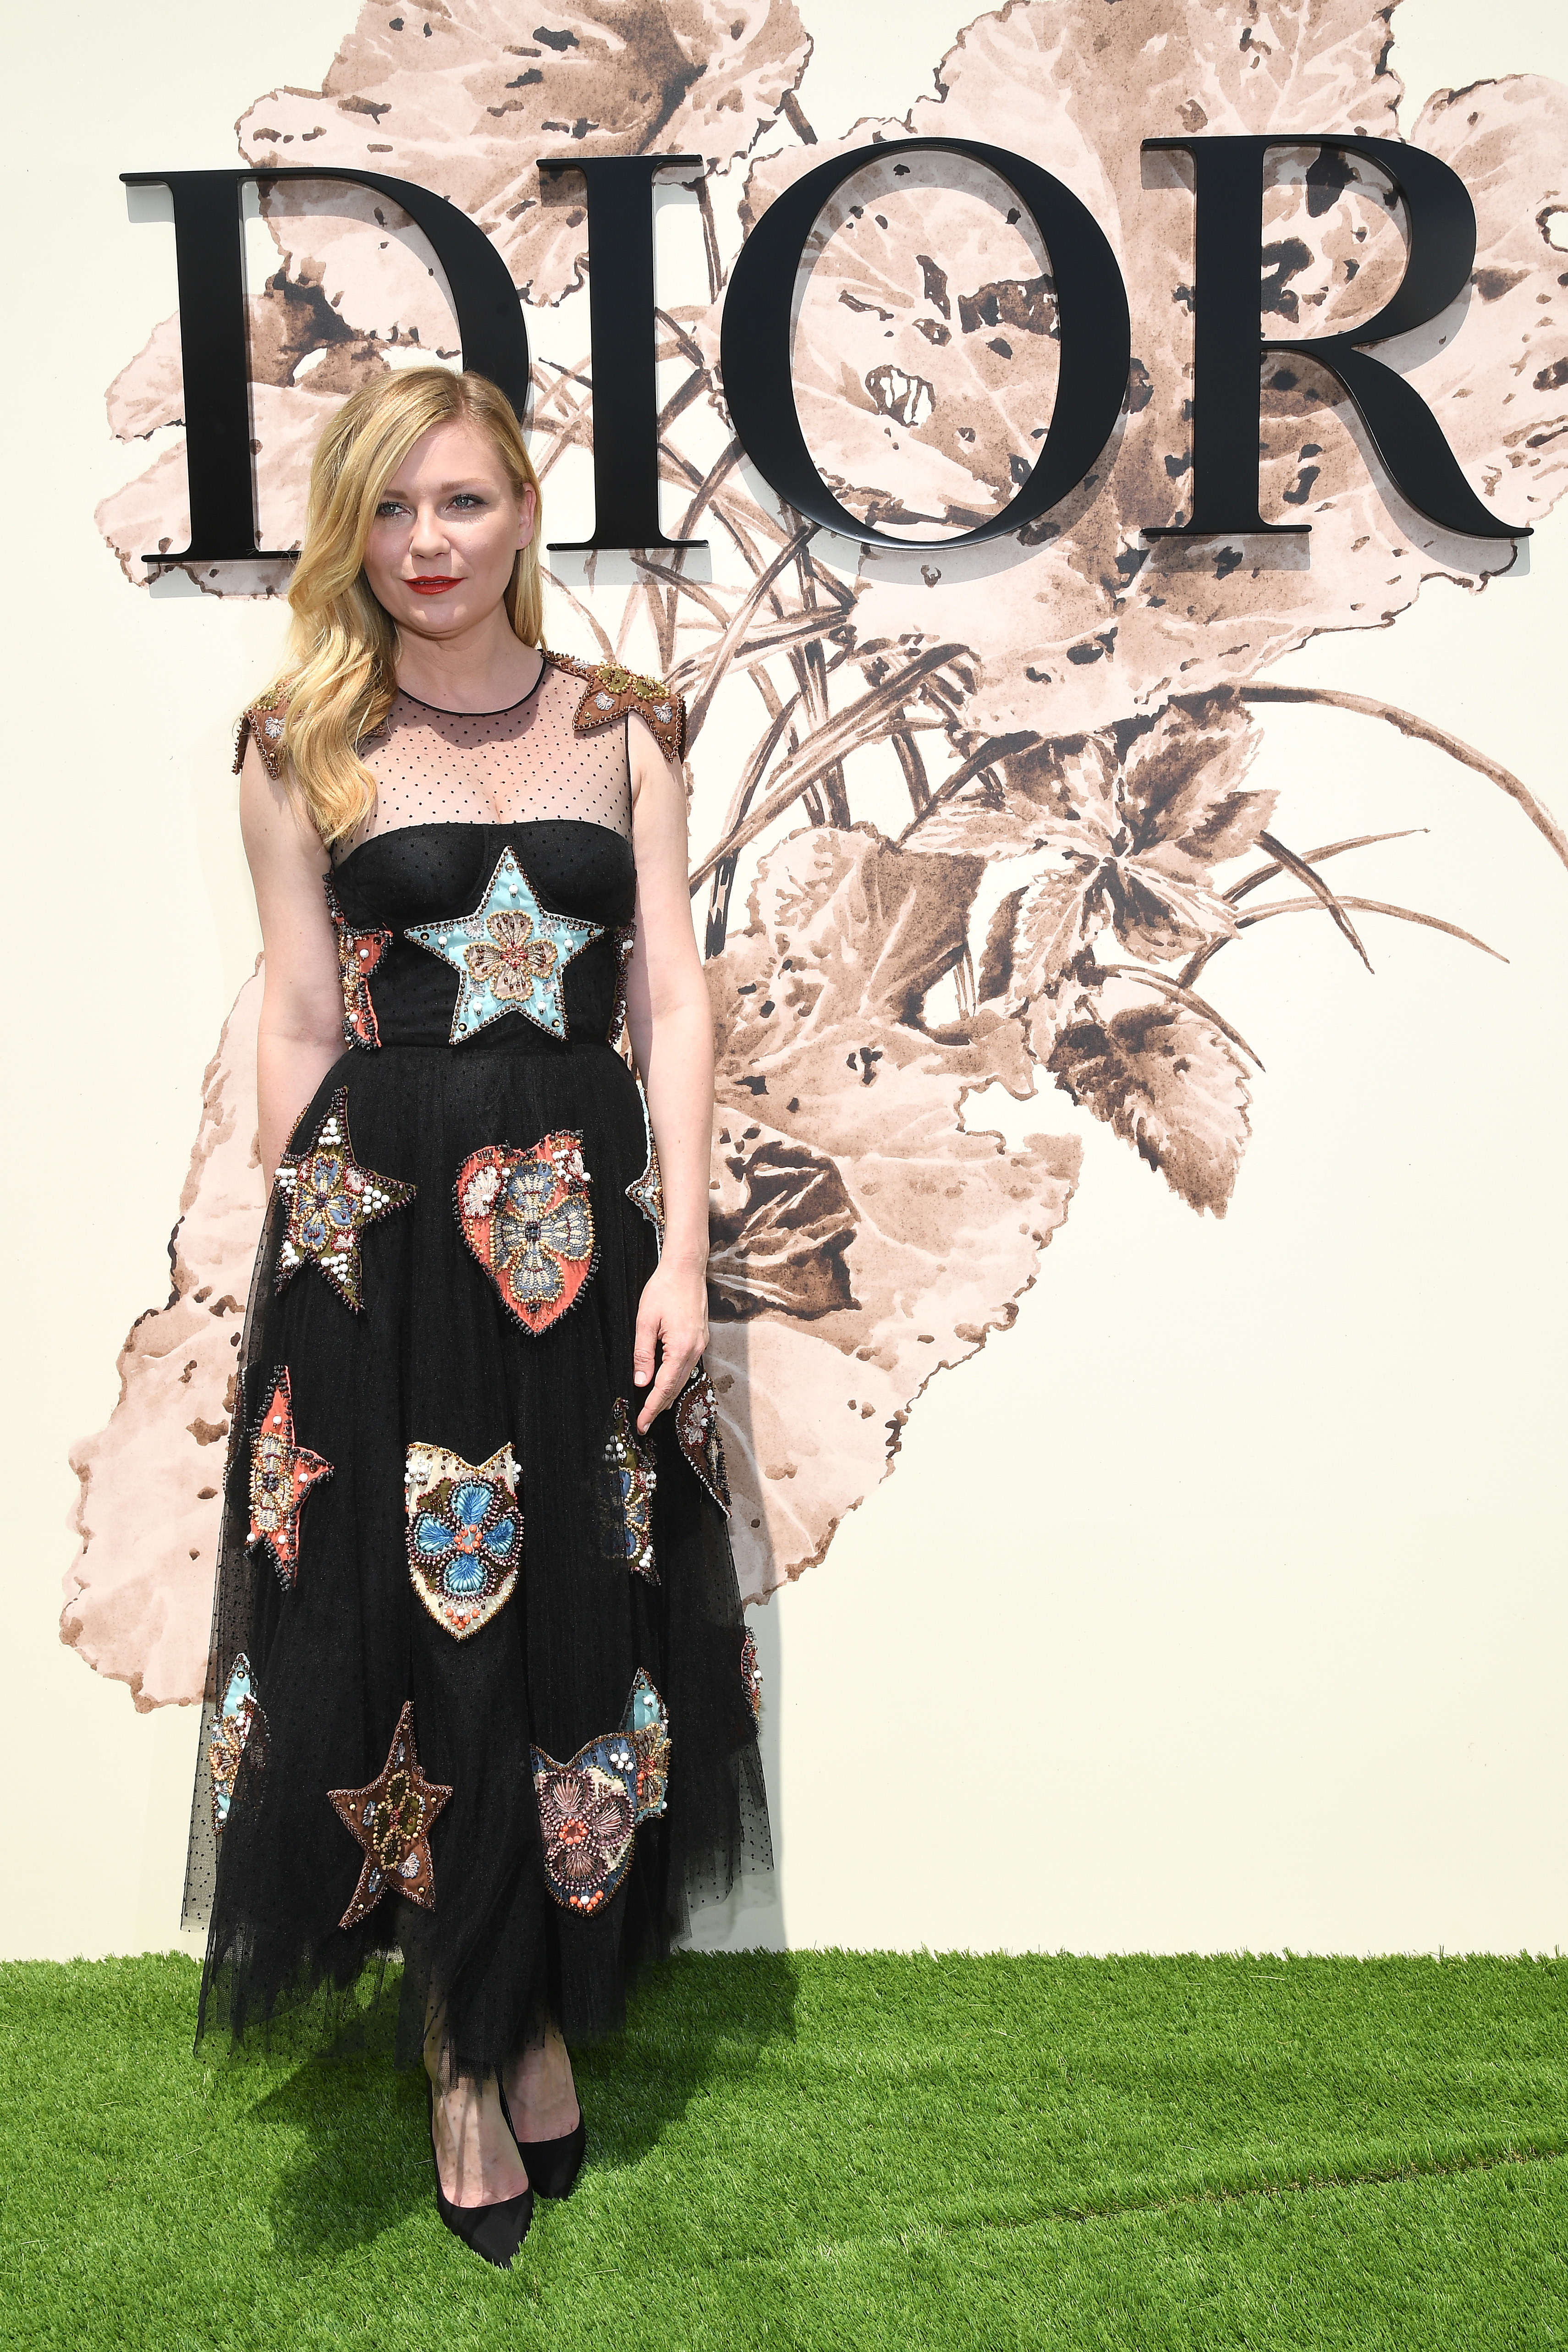 PARIS, FRANCE - JULY 03:  Kirsten Dunst attends the Christian Dior Haute Couture Fall/Winter 2017-2018 show as part of Haute Couture Paris Fashion Week on July 3, 2017 in Paris, France.  (Photo by Pascal Le Segretain/Getty Images for Christian Dior) *** Local Caption *** Kirsten Dunst